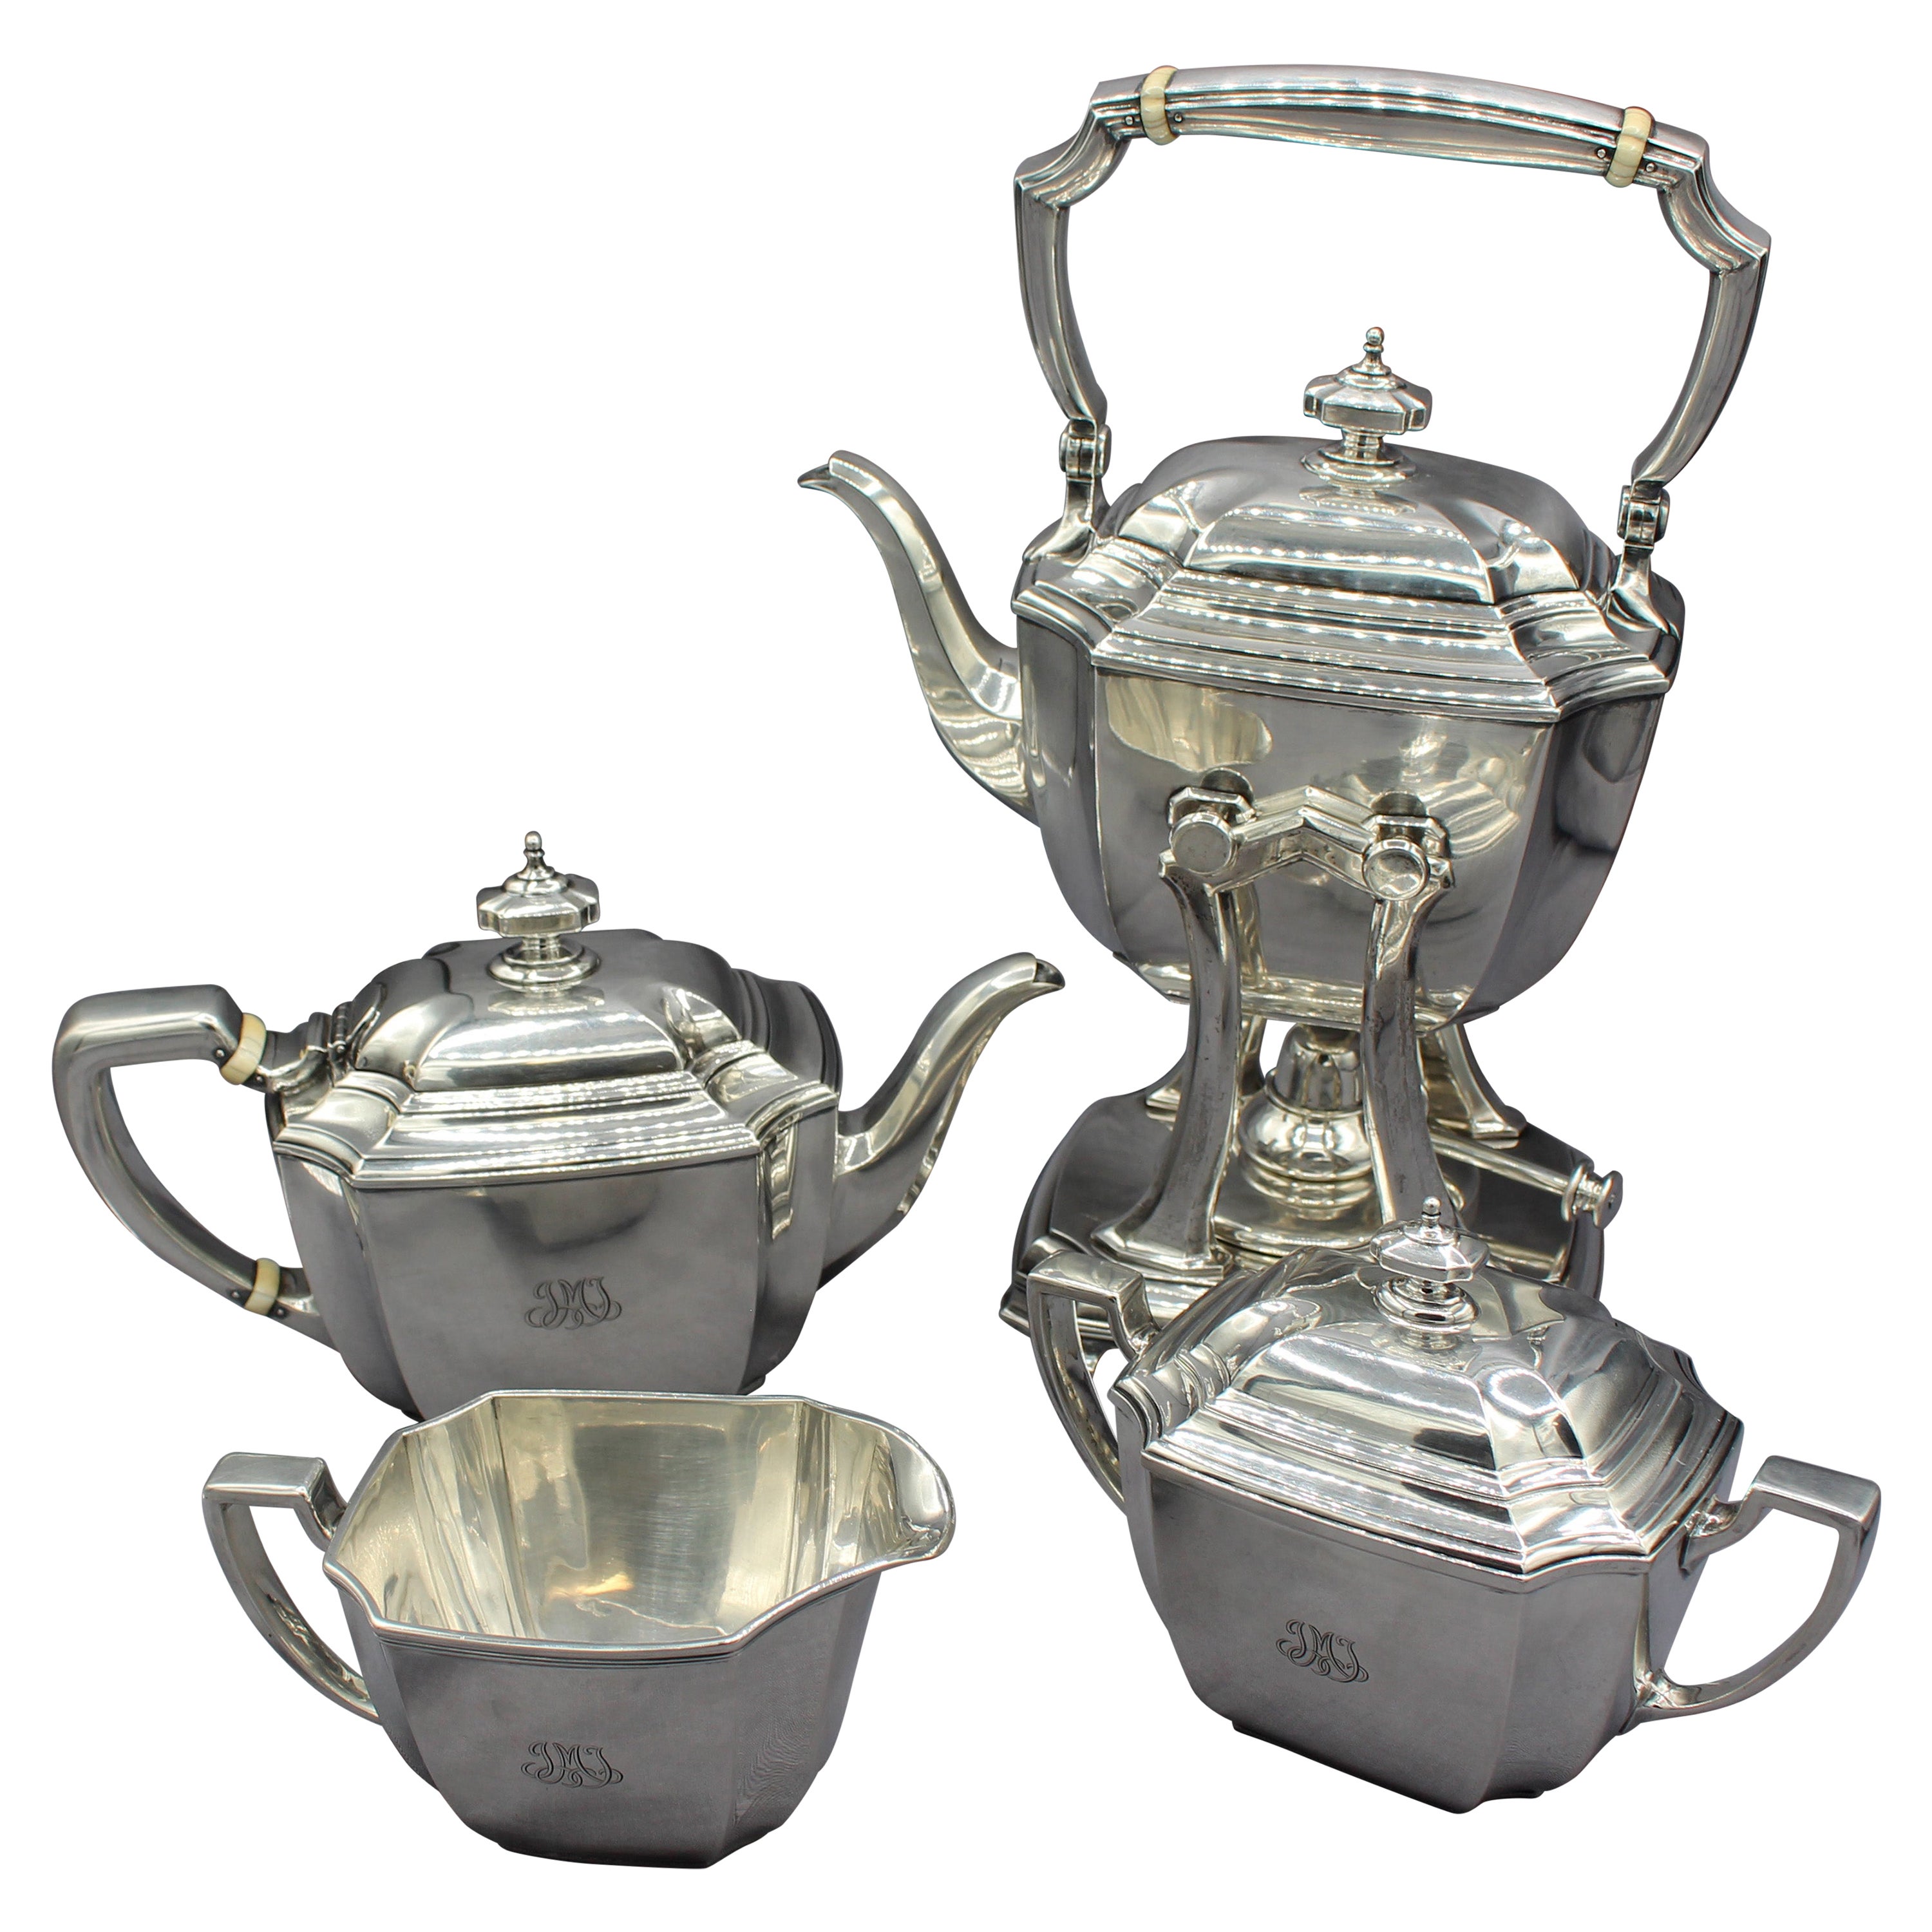 c. 1920s-30s 4-Pieces Sterling Silver Tea Service by Tiffany